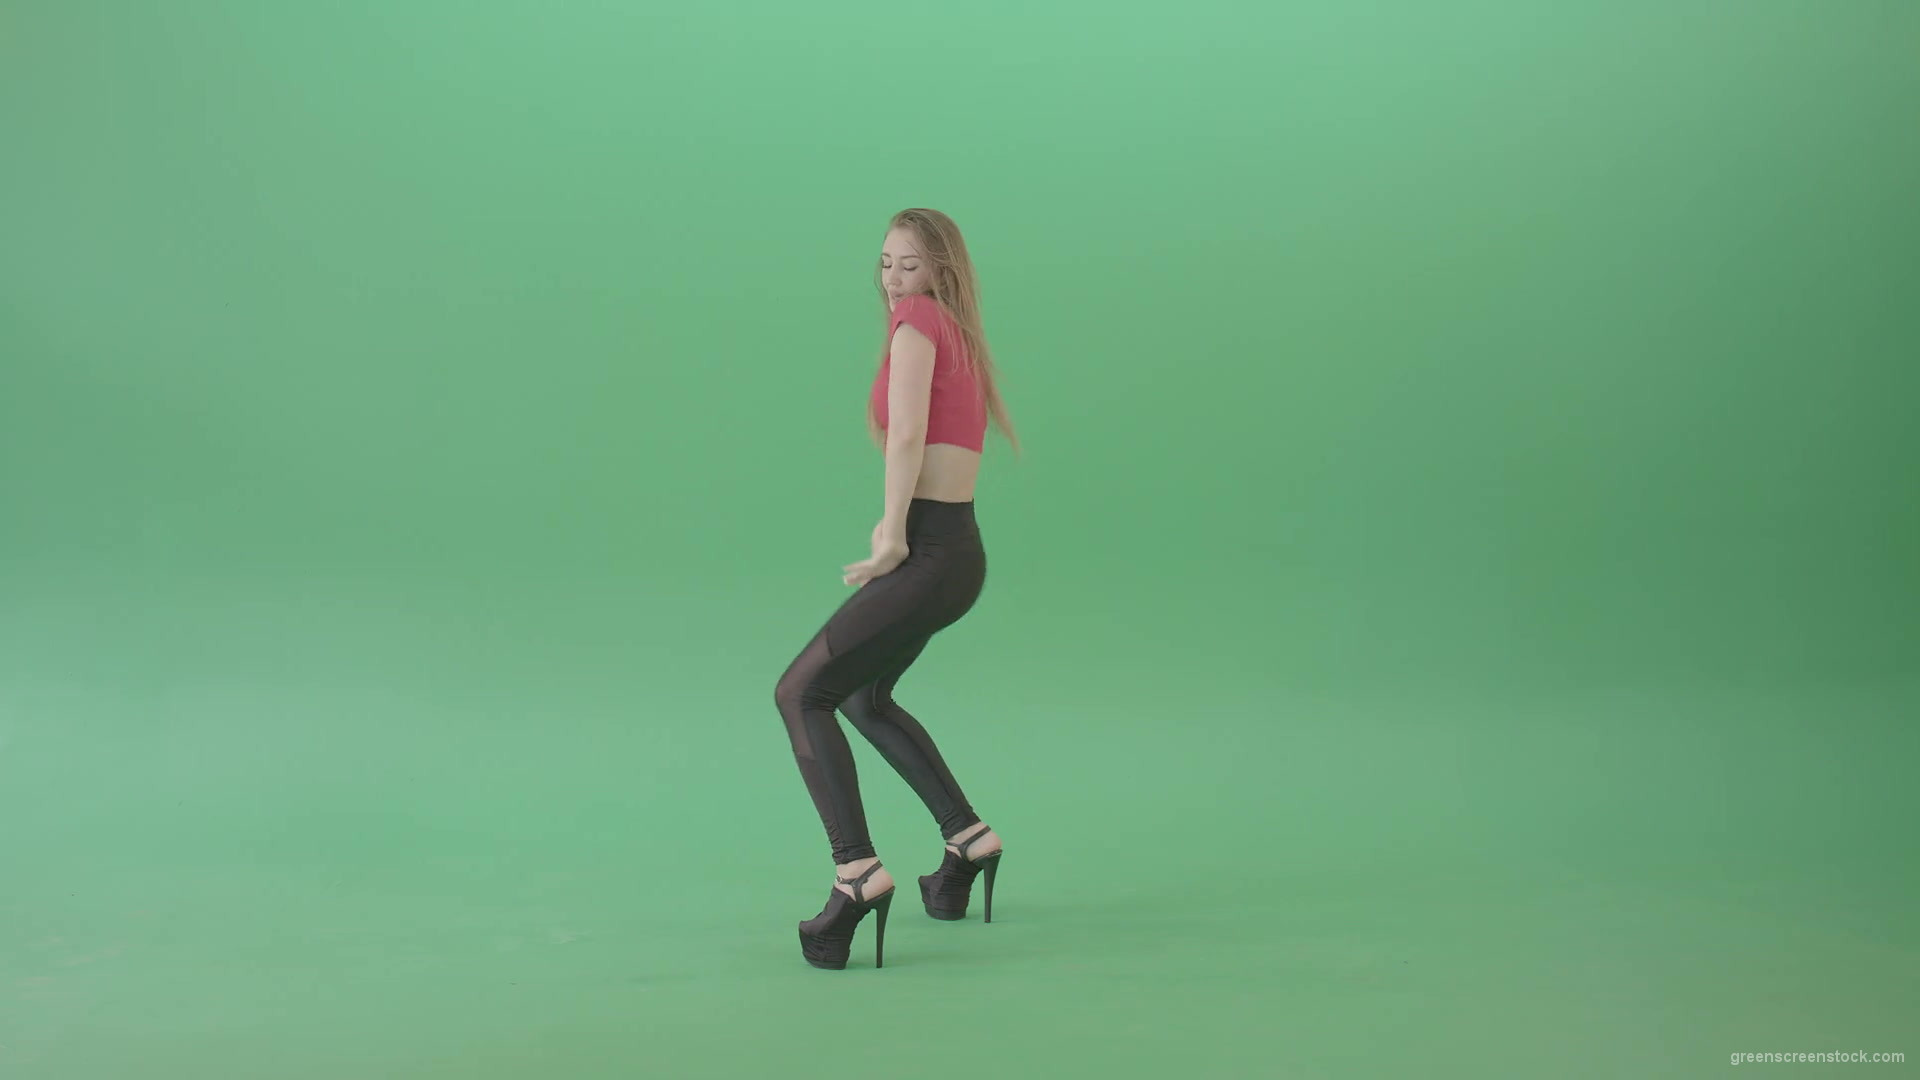 Sexy-posing-girl-showing-buts-and-dancing-on-green-screen-4K-Video-Footage-1920_007 Green Screen Stock